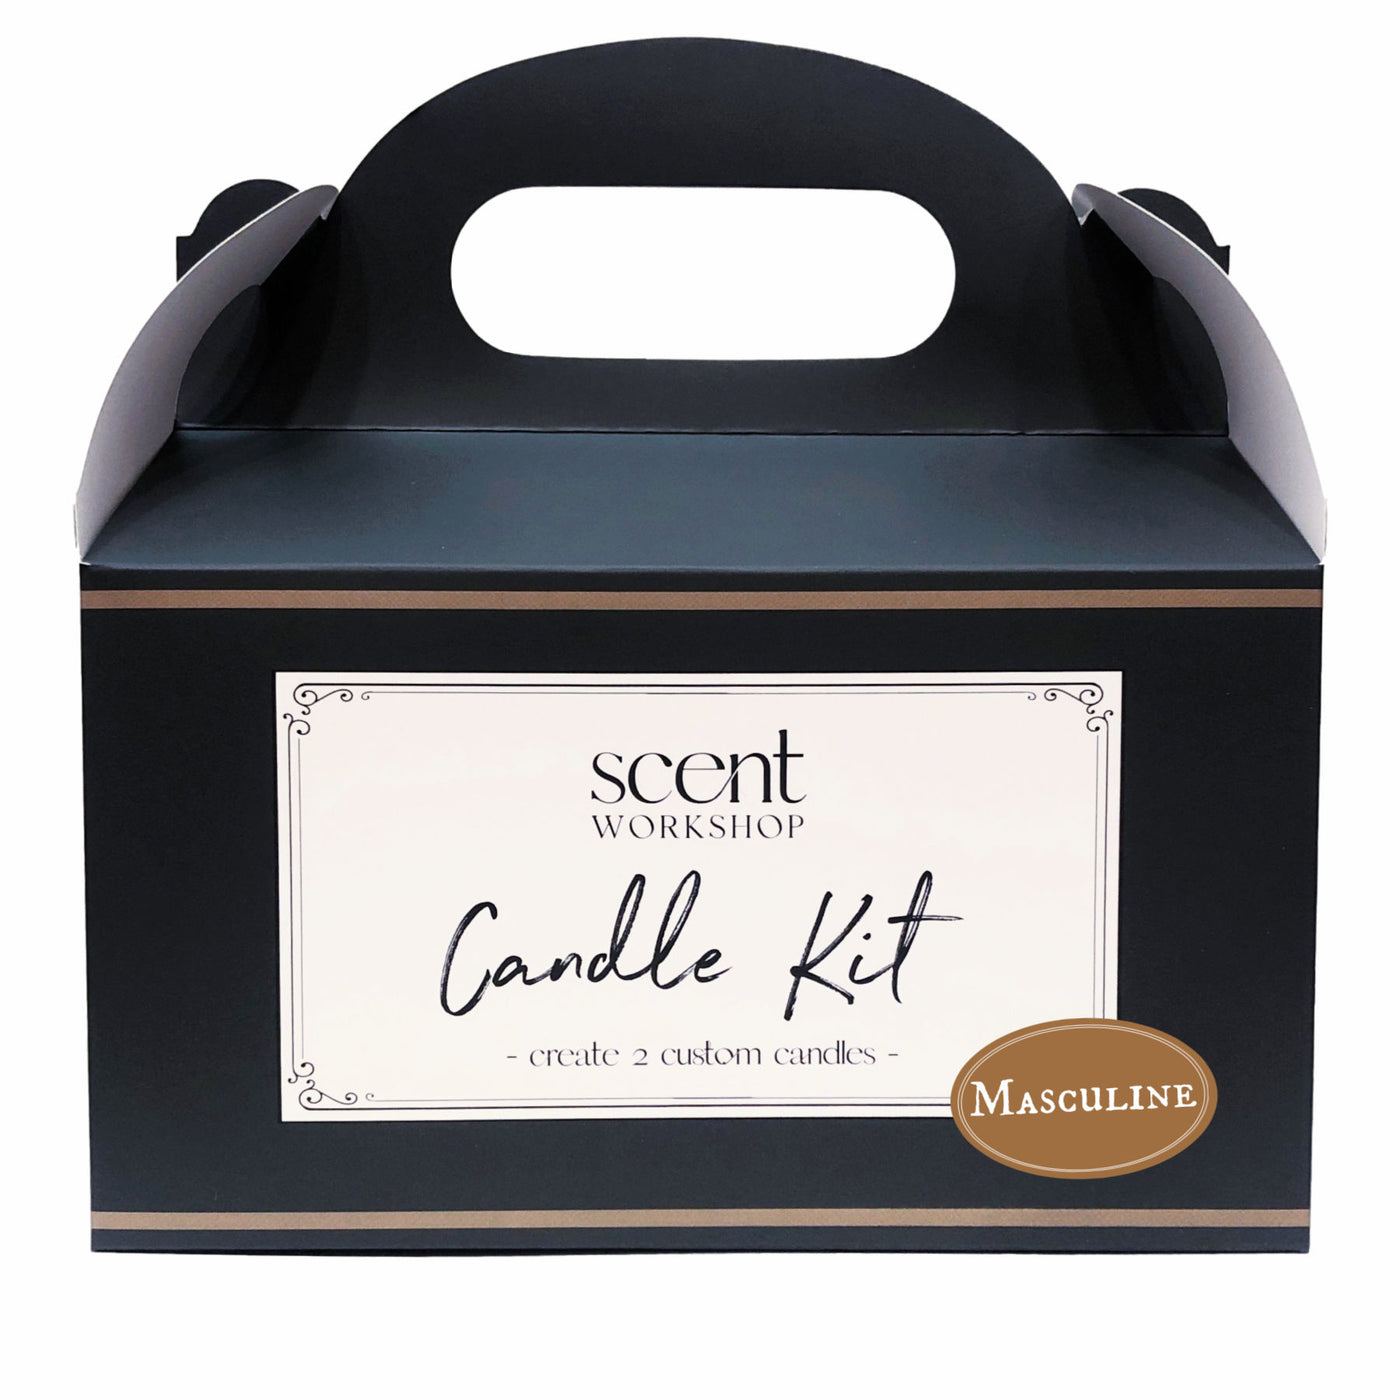 Masculine Candle Kit